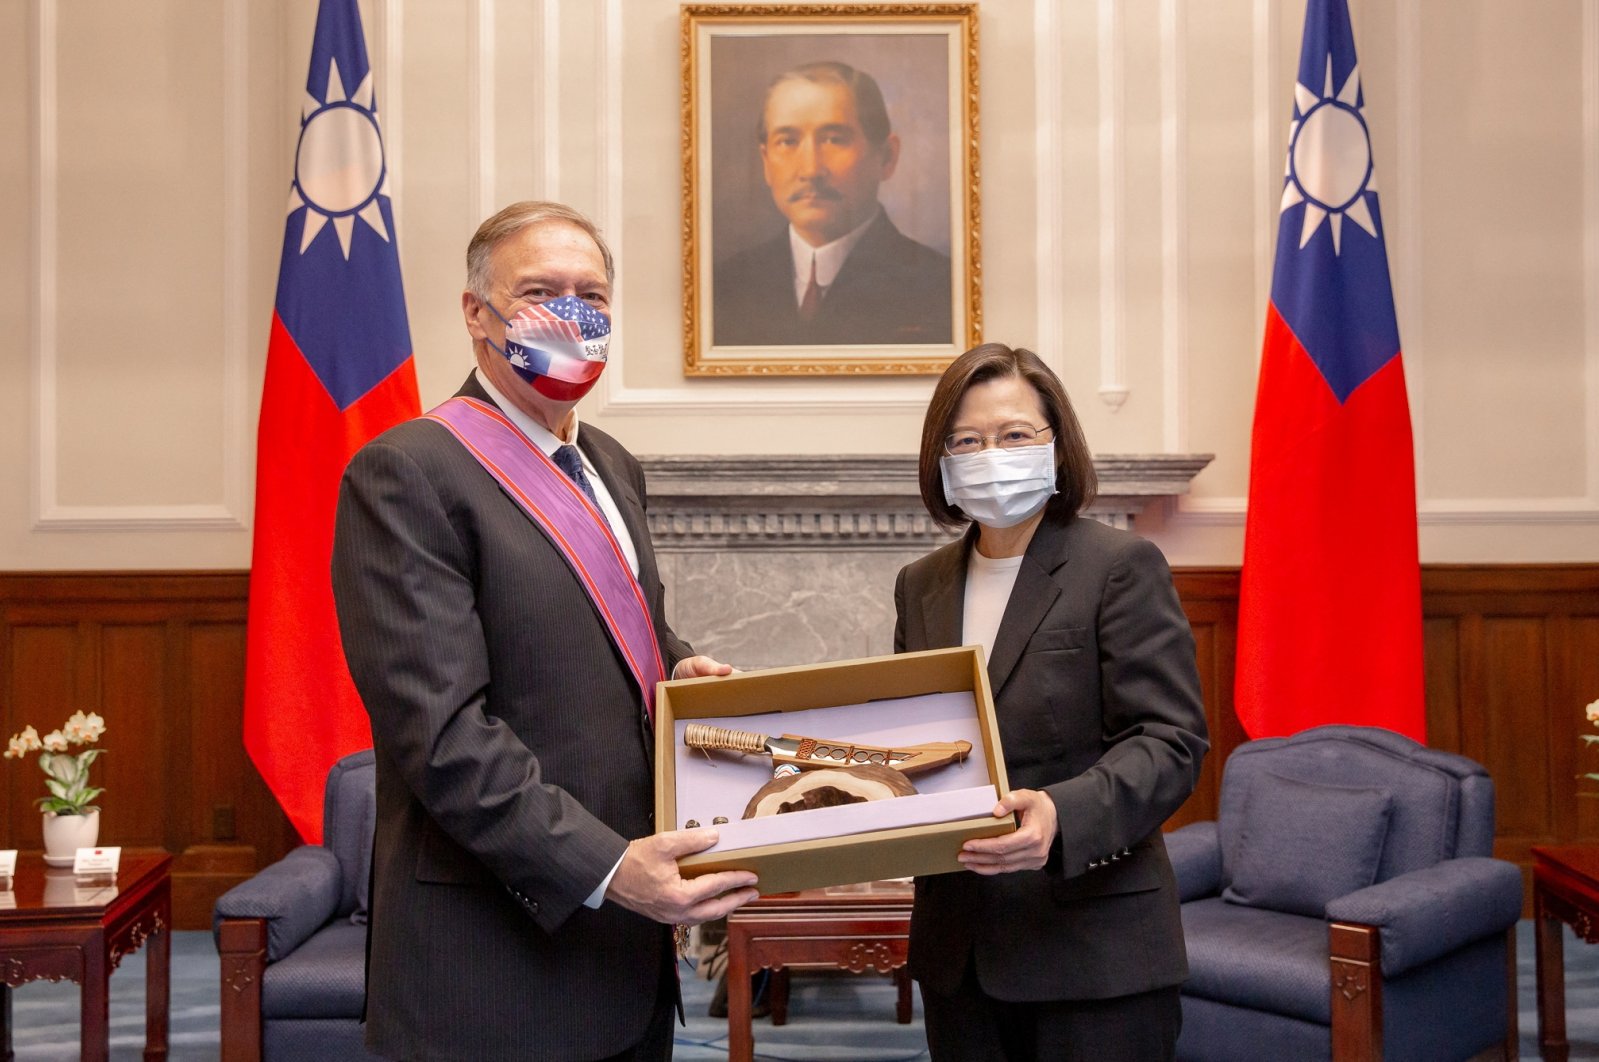 Taiwan&#039;s President Tsai Ing-wen poses for pictures with former U.S. Secretary of State Mike Pompeo after he was bestowed with an Order of Brilliant Star with Grand Cordon at the presidential building in Taipei, Taiwan, March 3, 2022. (Reuters Photo)